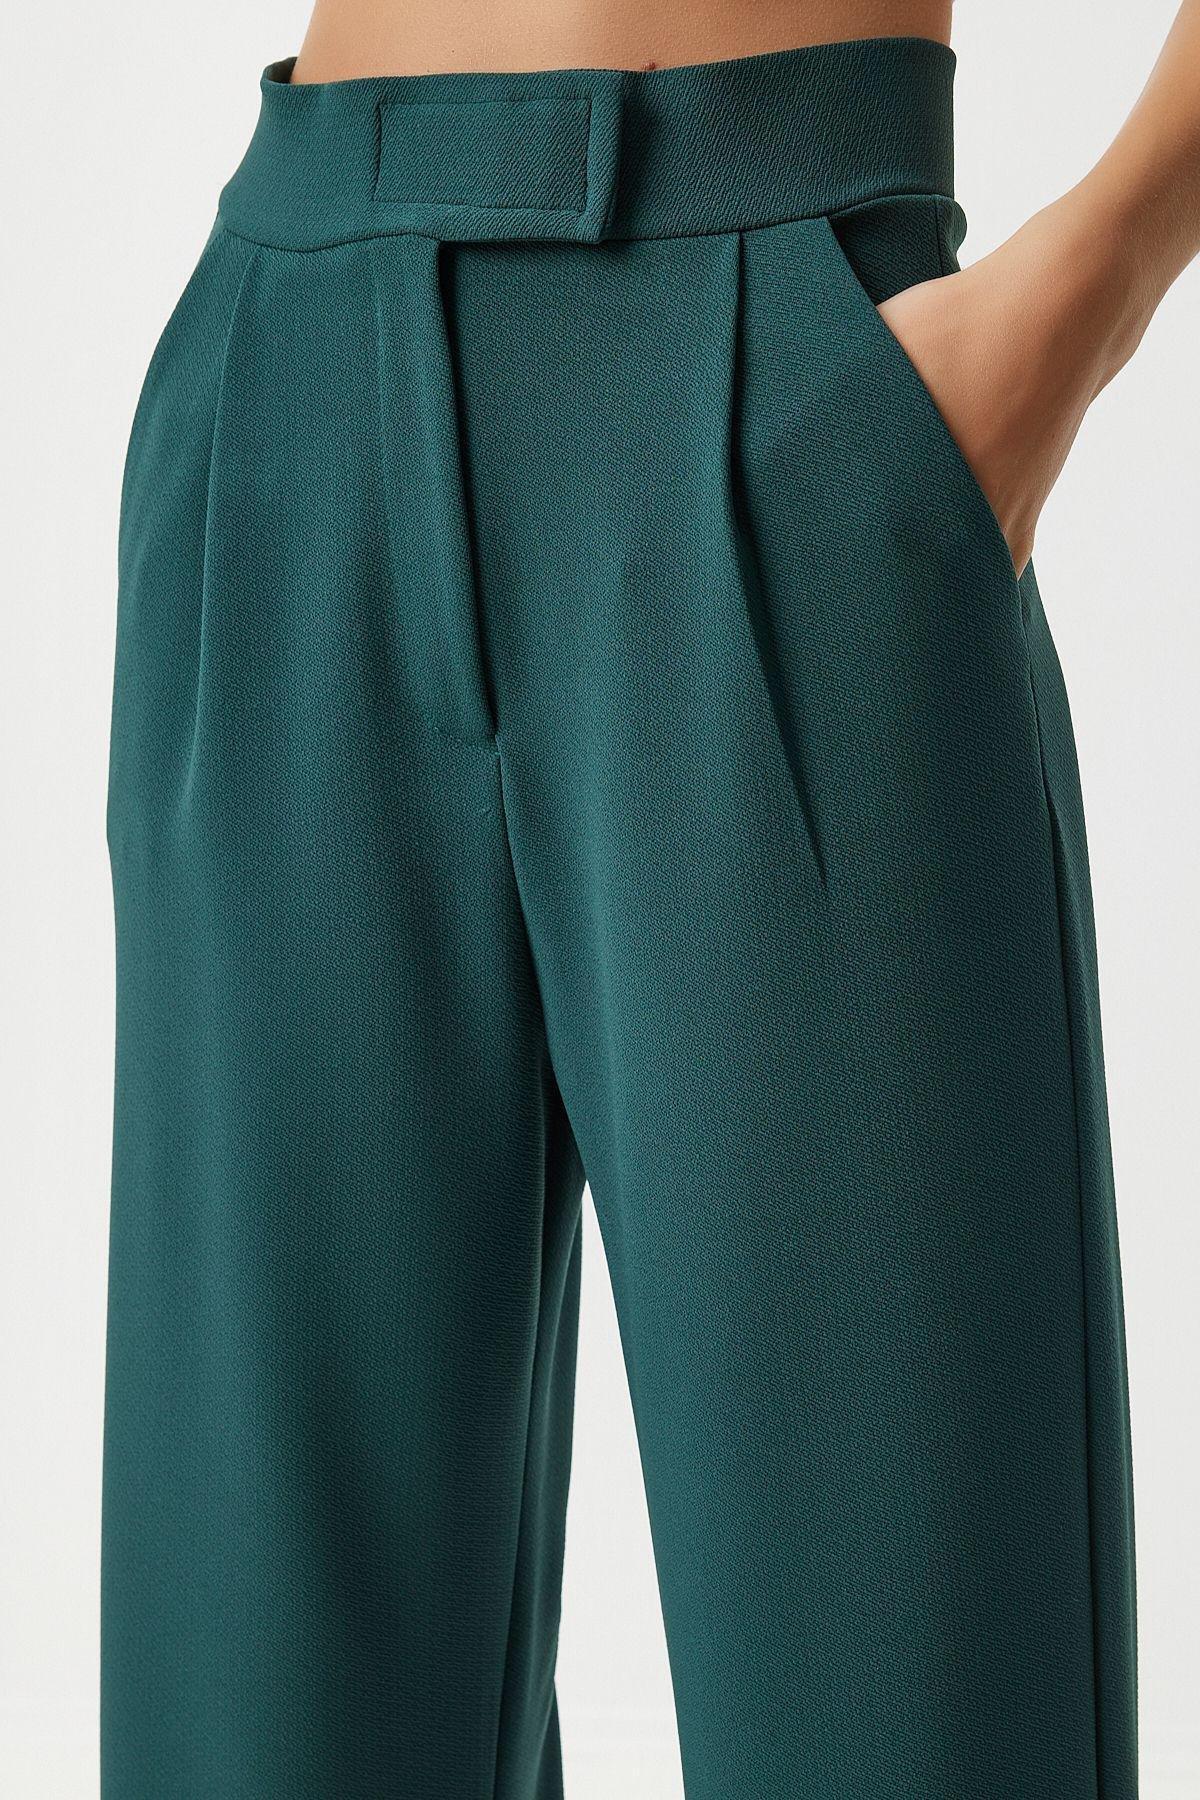 Happiness Istanbul - Green Comfort Woven Pants With A Waist